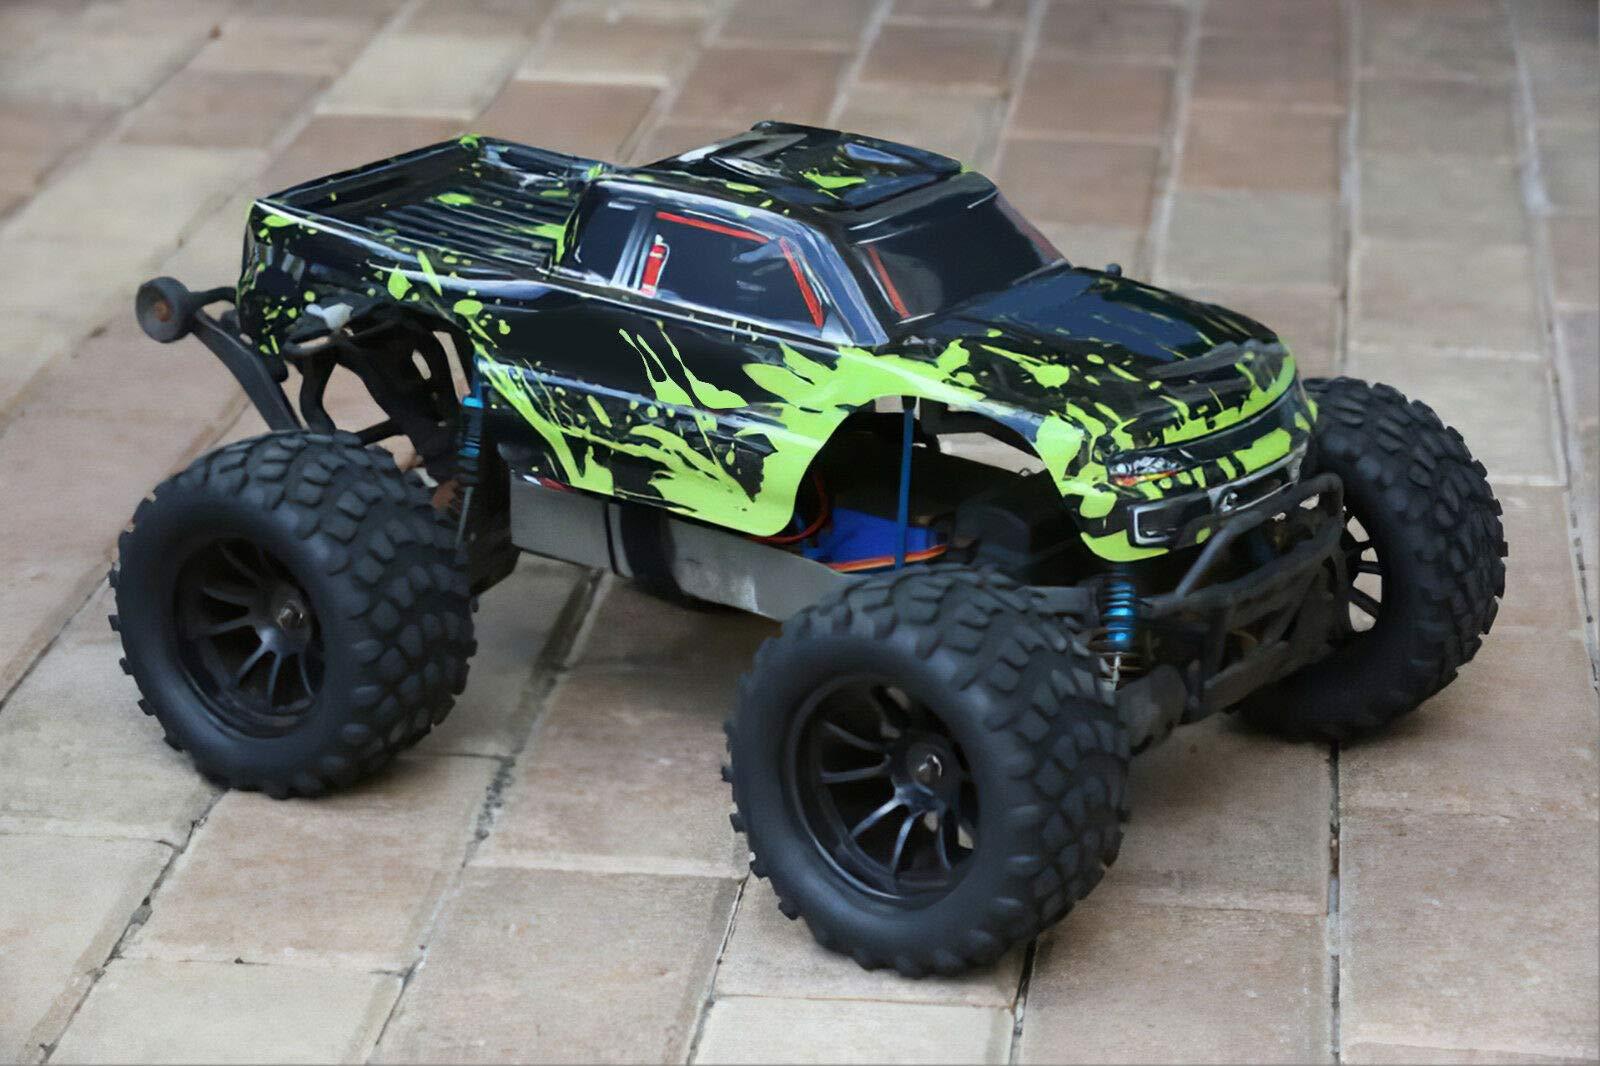 Custom Painted Rc Bodies For Sale: Choosing the Perfect Custom Painted Monster Truck Body